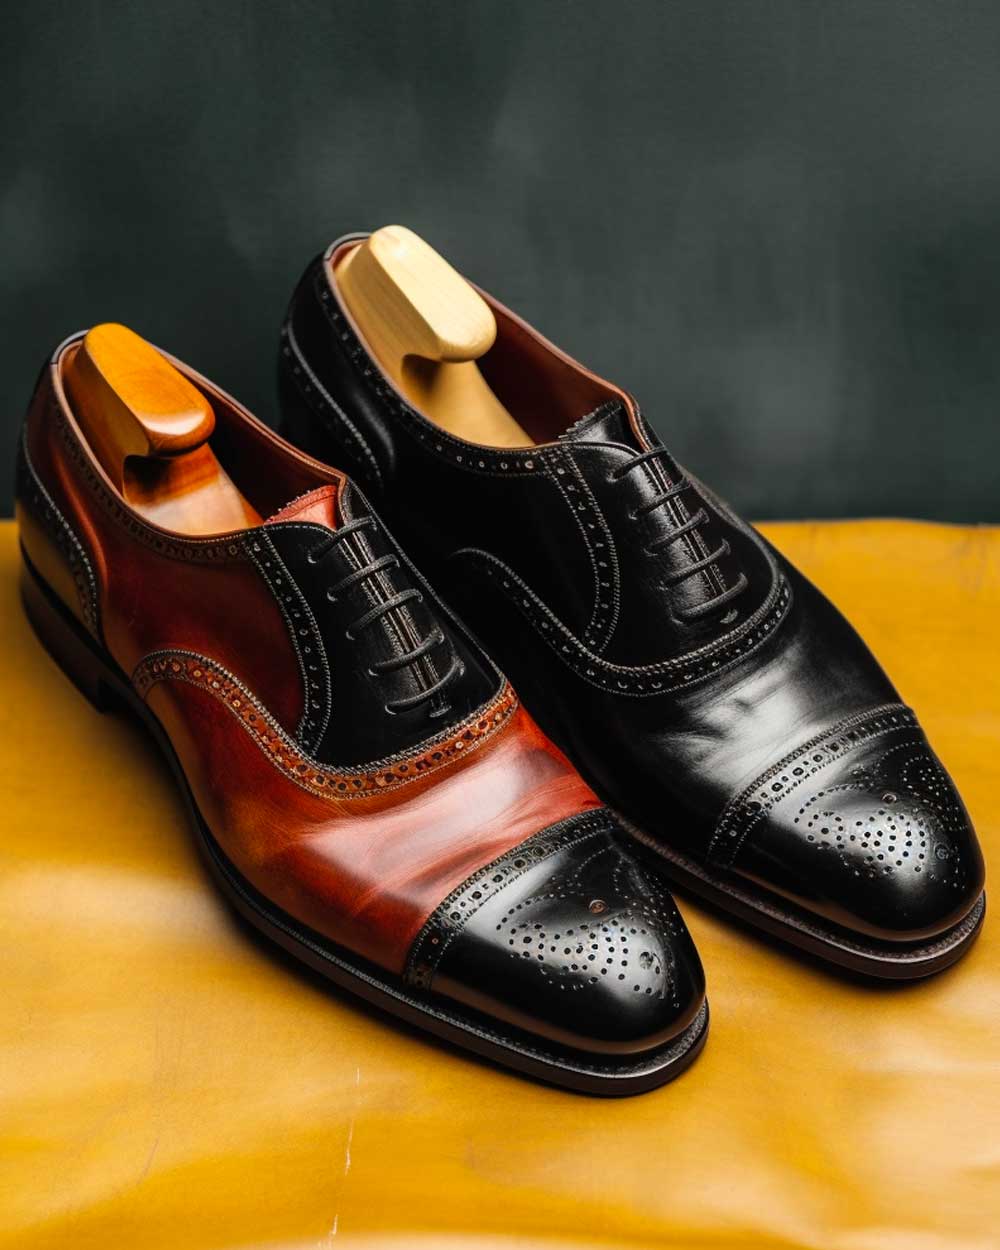 Preppy style Oxford shoes